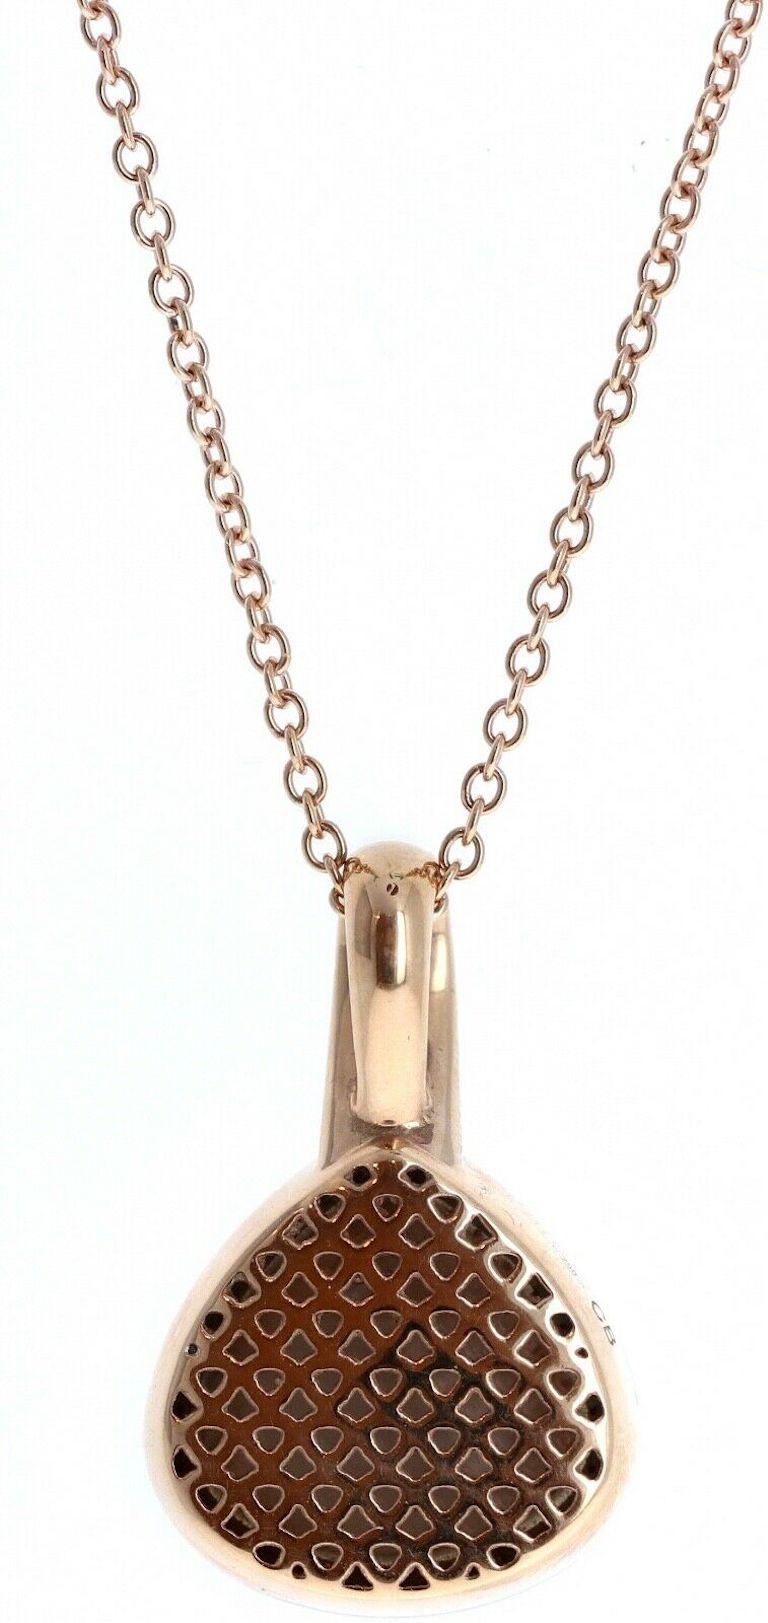 NEW Carl Bucherer 18k Rose Gold, Brown Diamonds, Chalcedony Pendant Necklace B&P


NEW For sale is a Carl Bucherer 18k rose gold pendent necklace.
 The pendant is comprised of brown round brilliant cut diamonds.
1 triangle shape chalcedony. 
Perfect